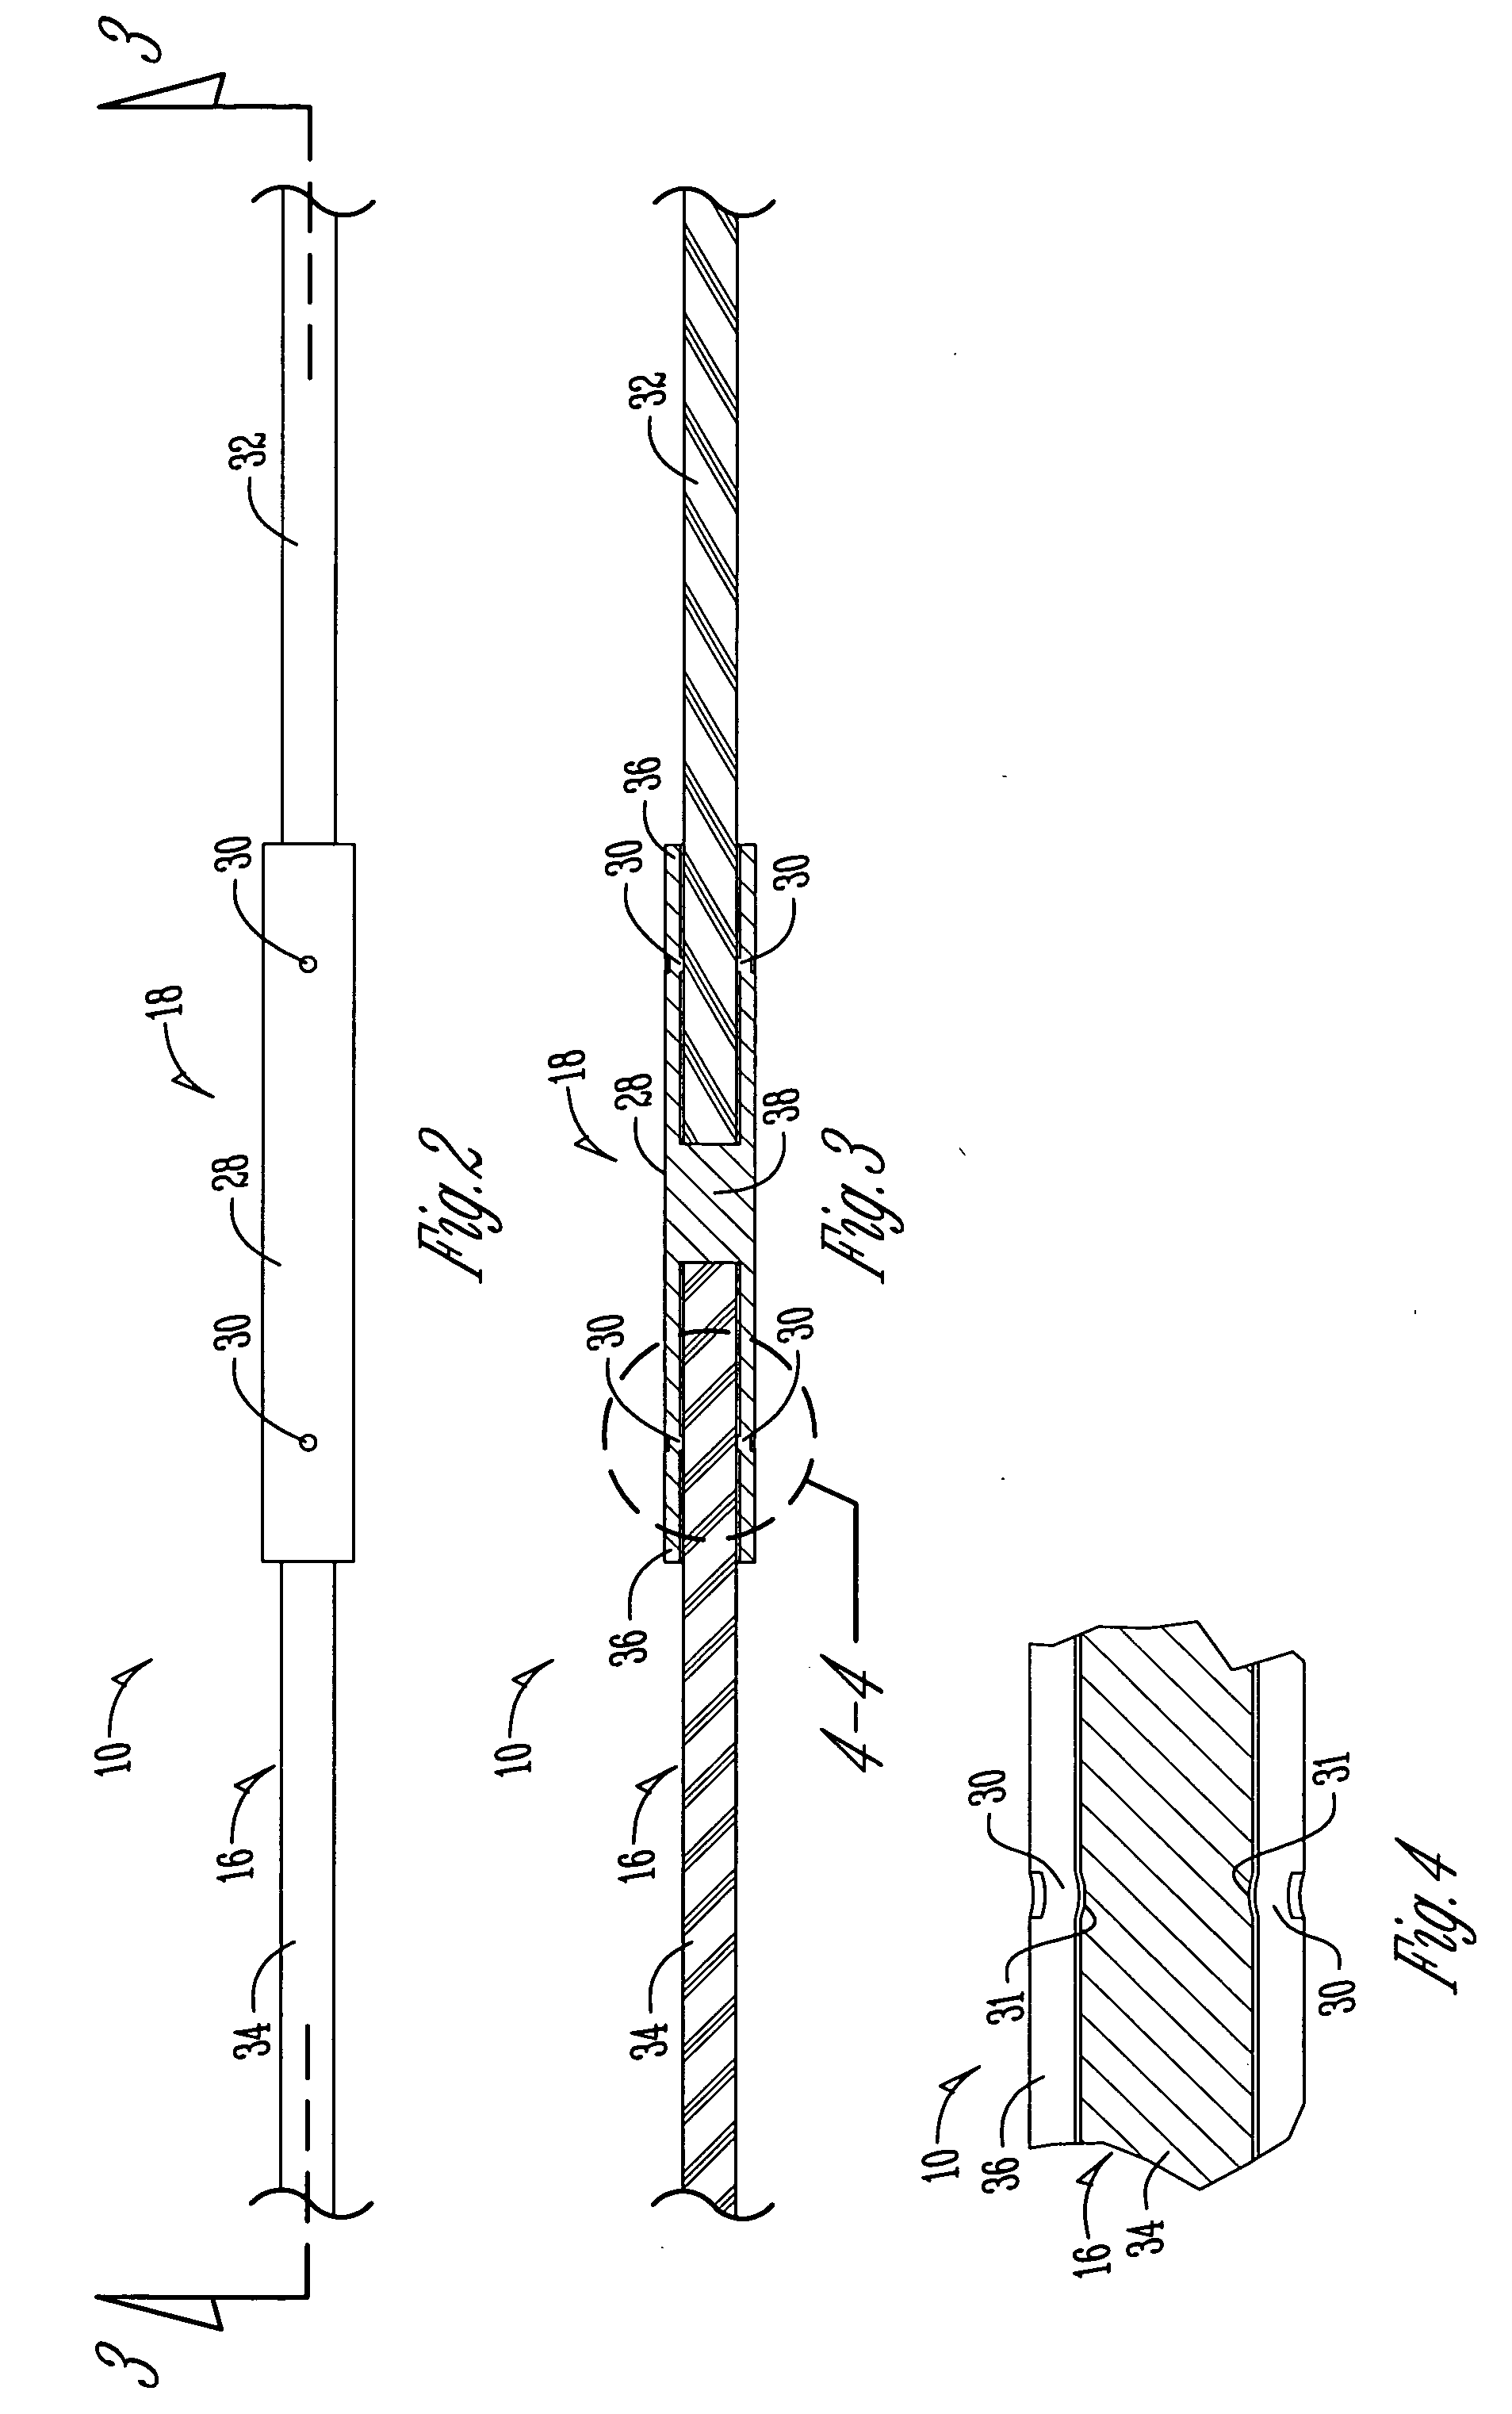 Golf flagstick assembly and method of joining